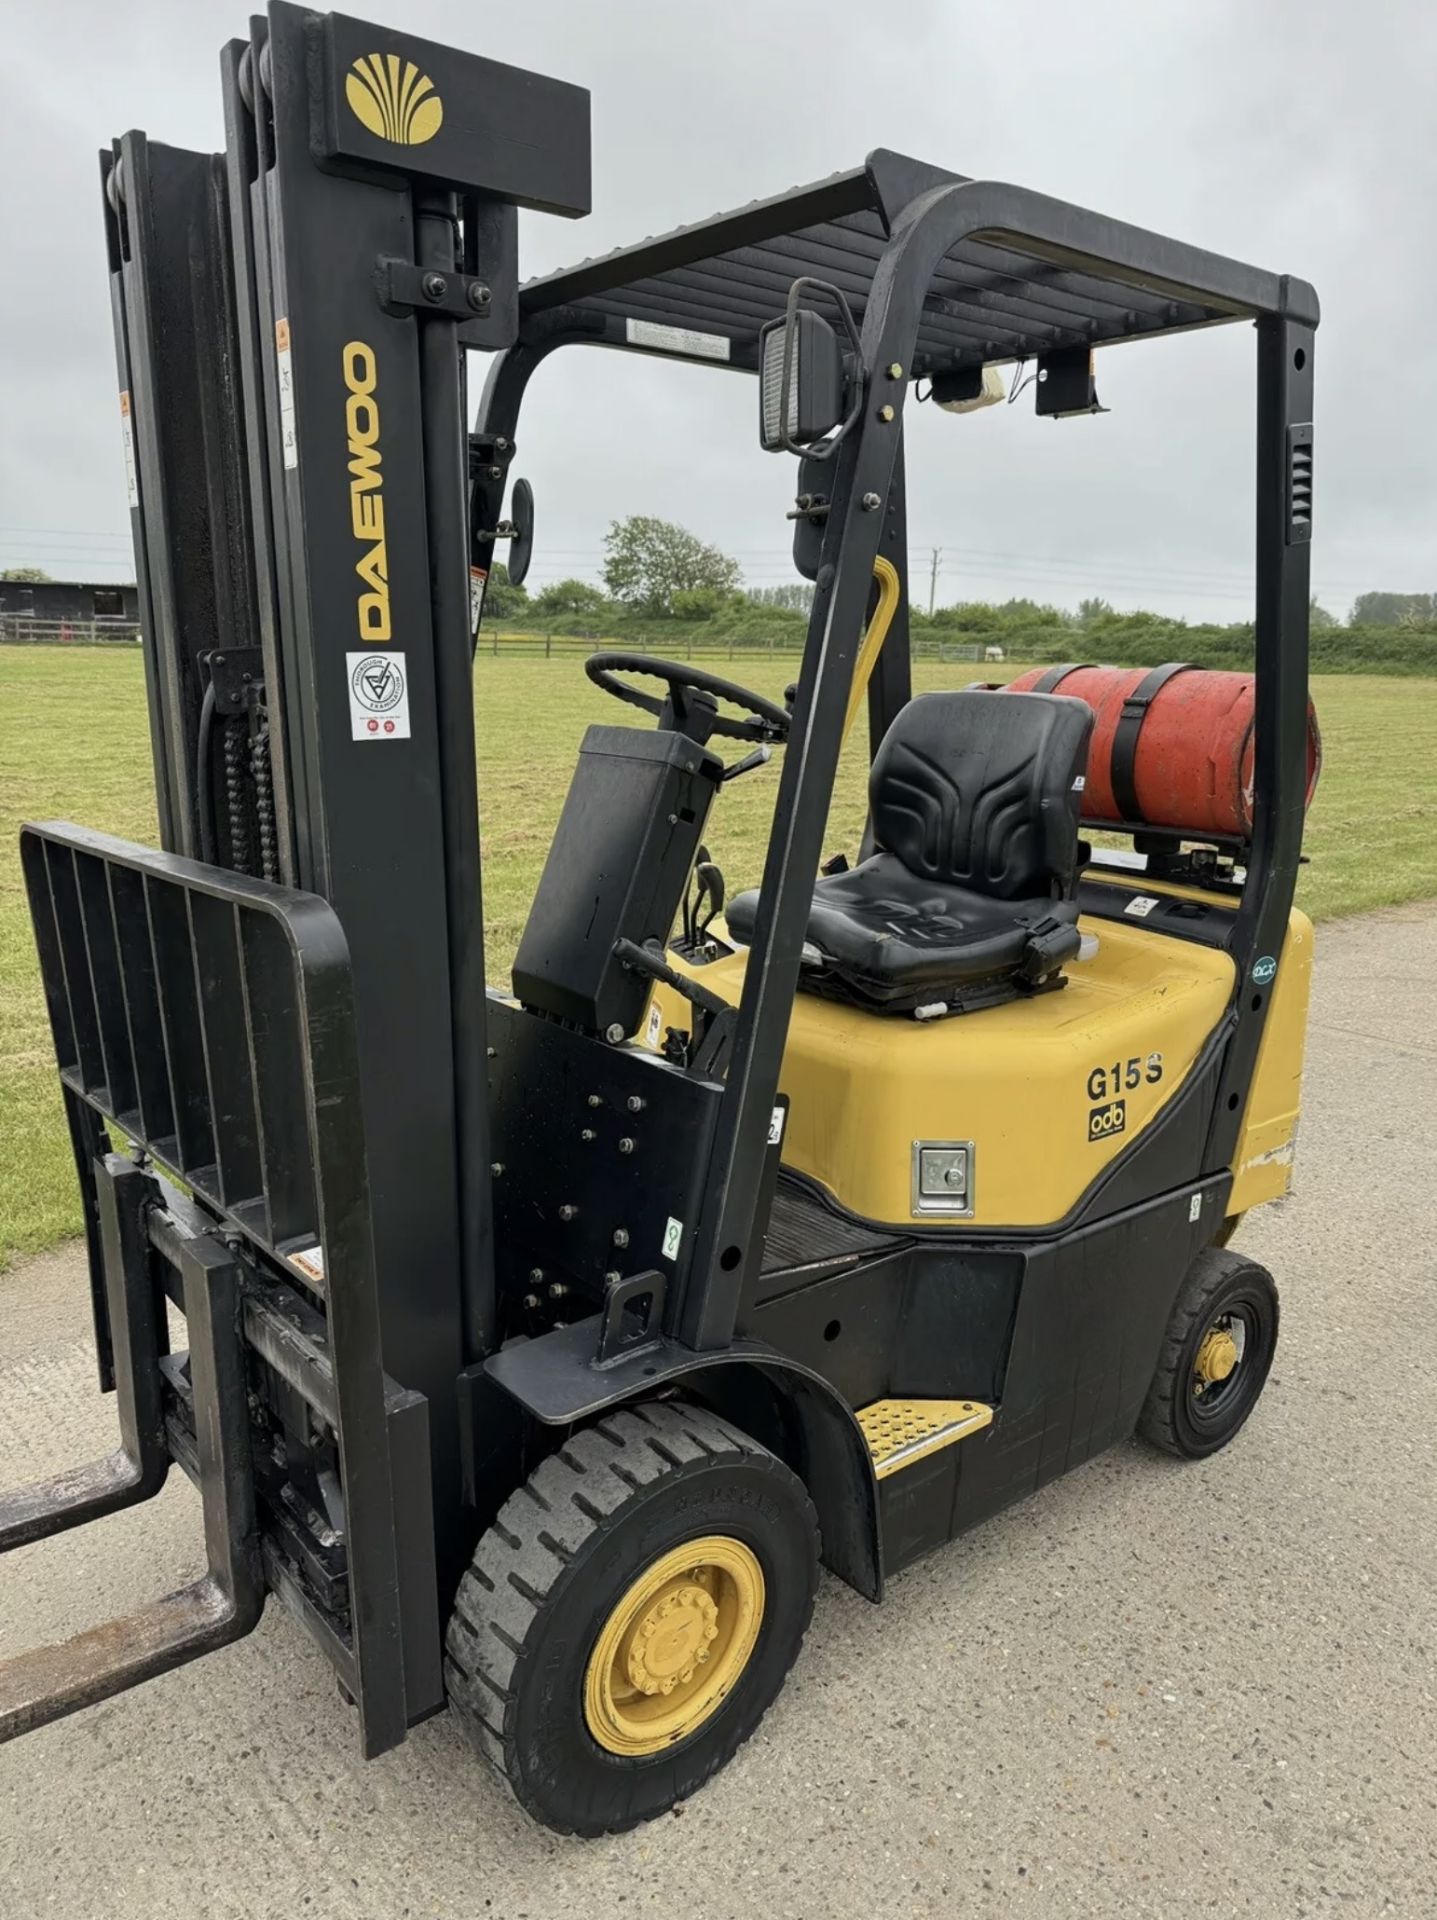 DAEWOO - 1.5 Gas Forklift (Container Spec)